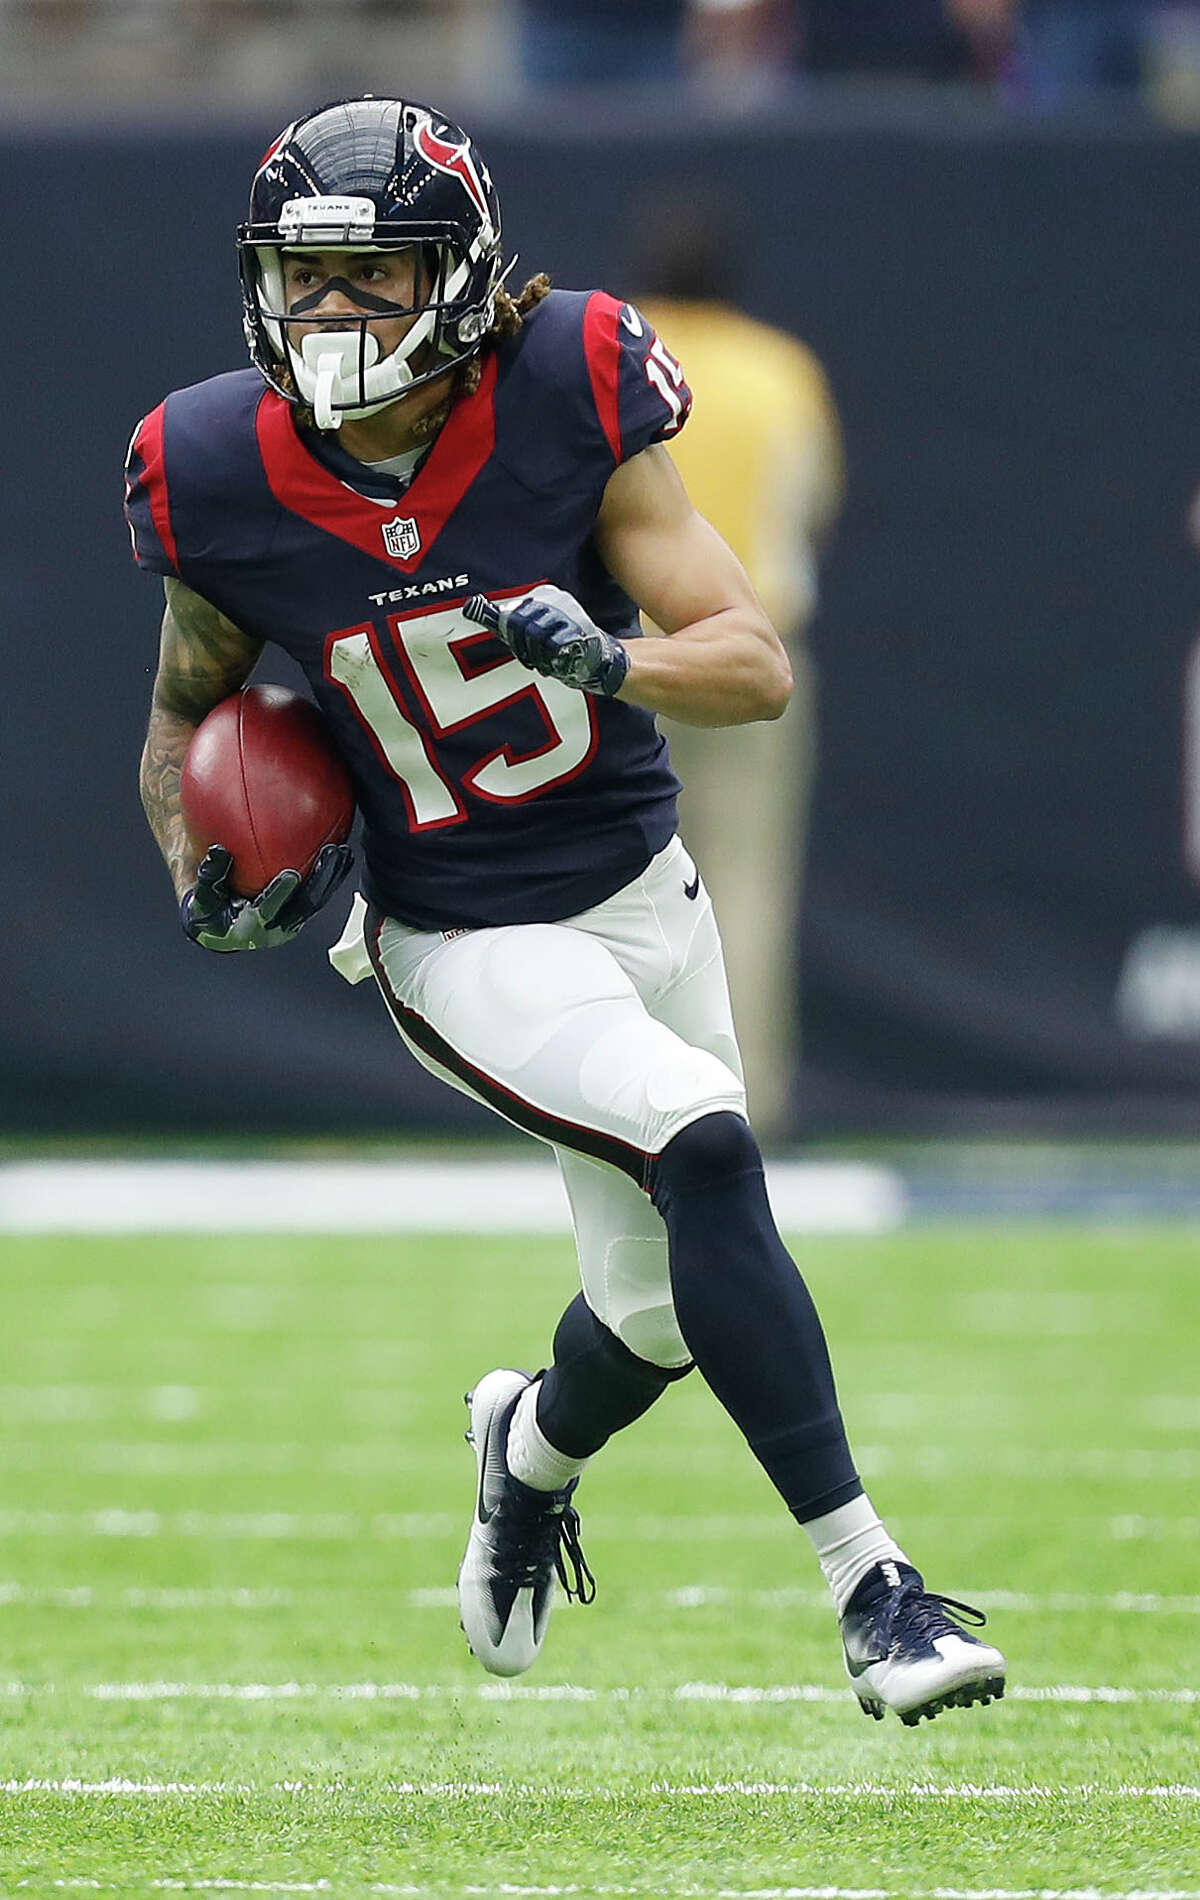 Houston Texans wide receiver Will Fuller (15) runs the ball for a 67-yard punt return for a touchdown during the third quarter of an NFL football game at NRG Stadium, Sunday, Oct. 2, 2016 in Houston. ( Karen Warren / Houston Chronicle )